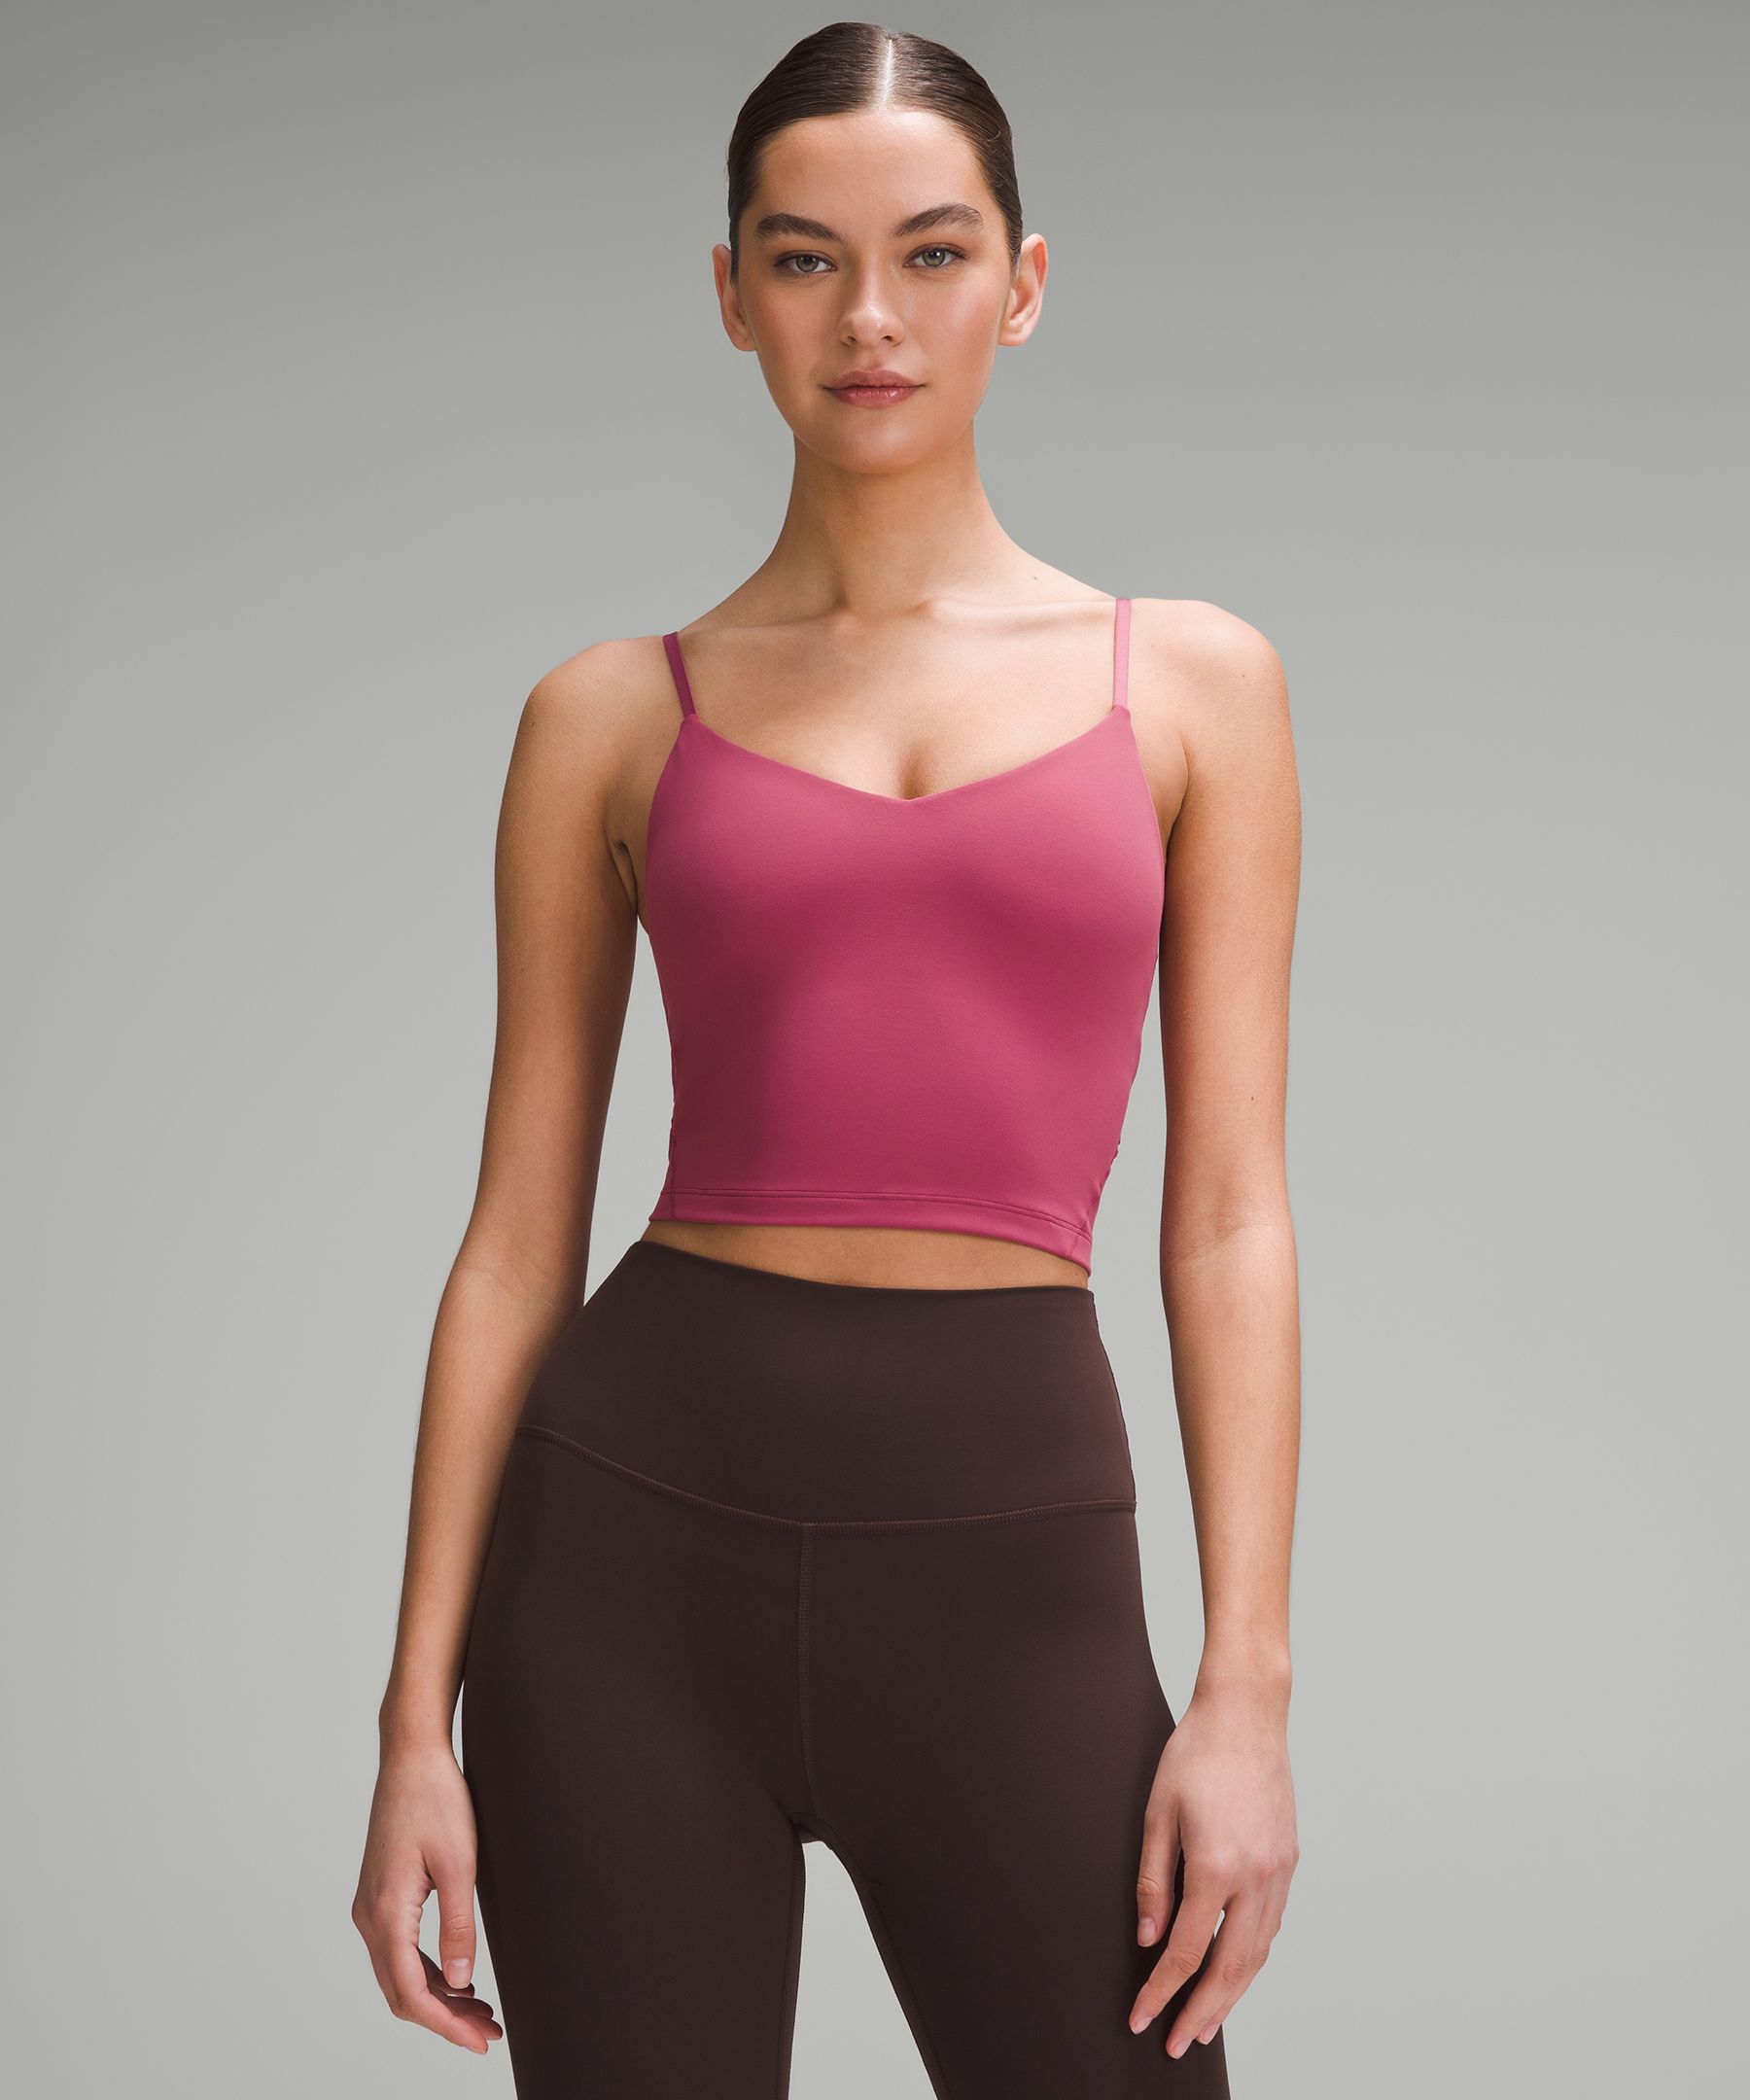 2023 Lulus Lemons Align Active Pants For Women Knee Length Tank Petite Gym  Leggings With Bra Top For Yoga, Gym, And Yoga Hot Selling European Outfit  From Perfectvalue77, $5.26